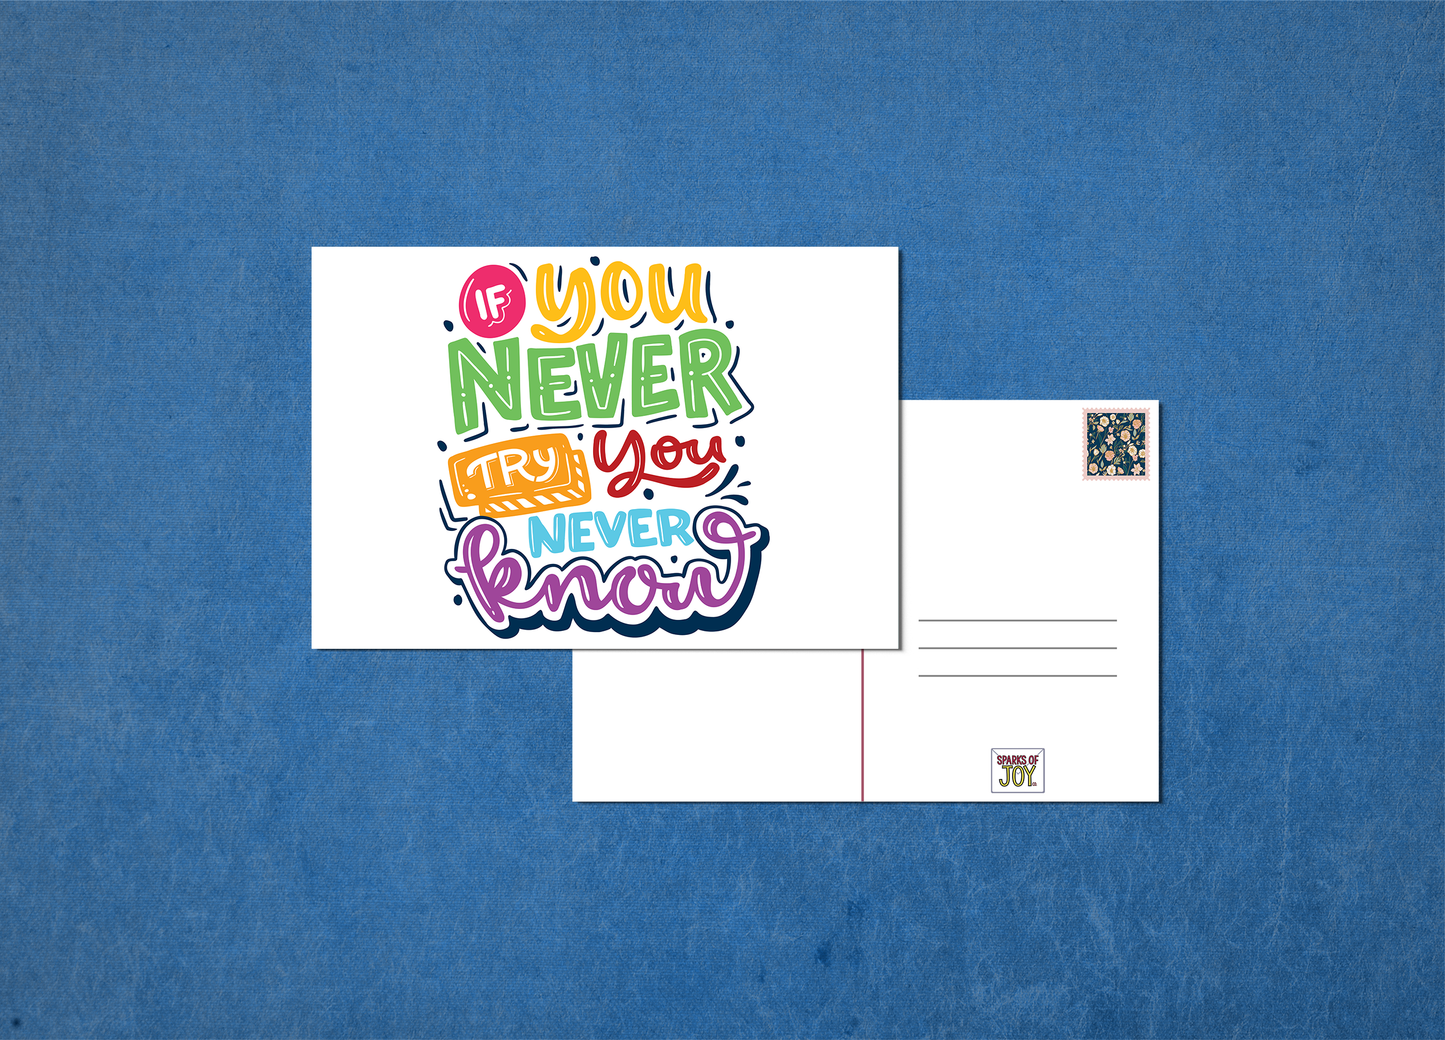 If You Never Try, You Never Know - Postcard